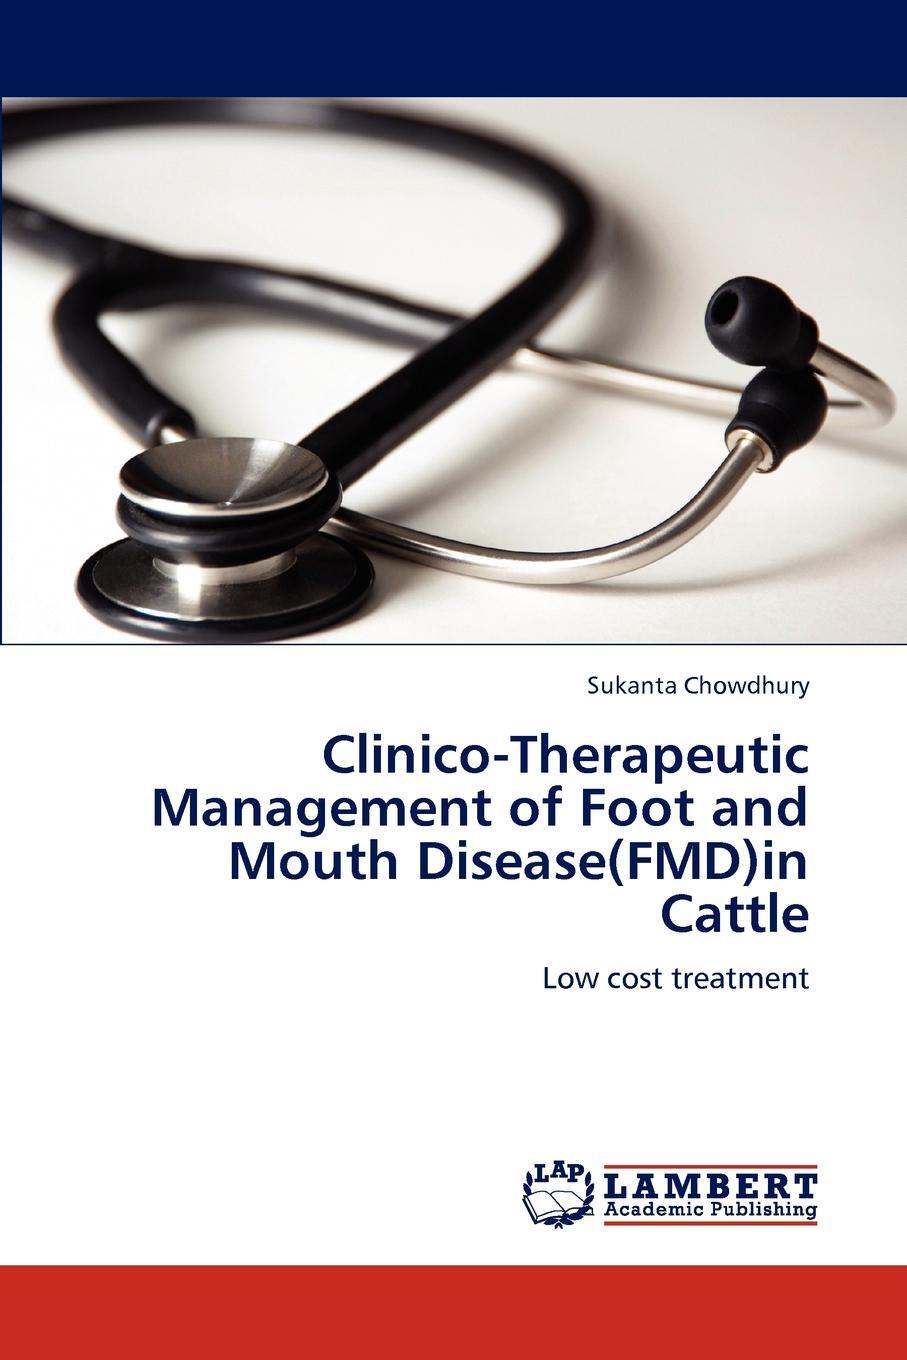 фото Clinico-Therapeutic Management of Foot and Mouth Disease(fmd)in Cattle